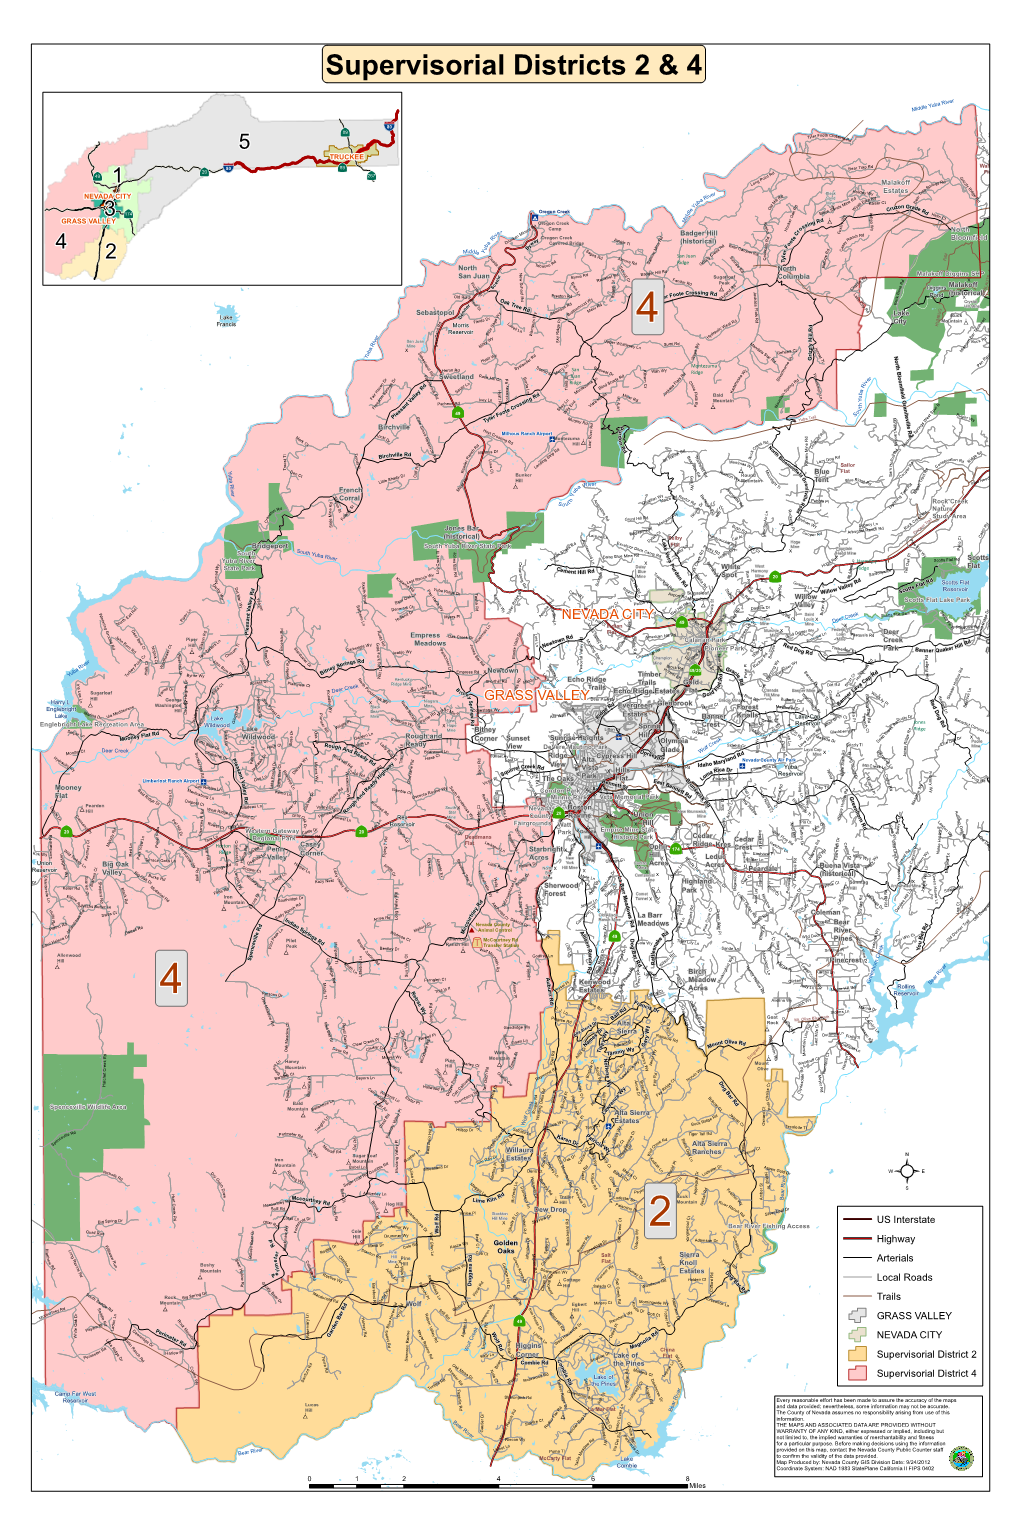 Supervisorial Districts 2 & 4